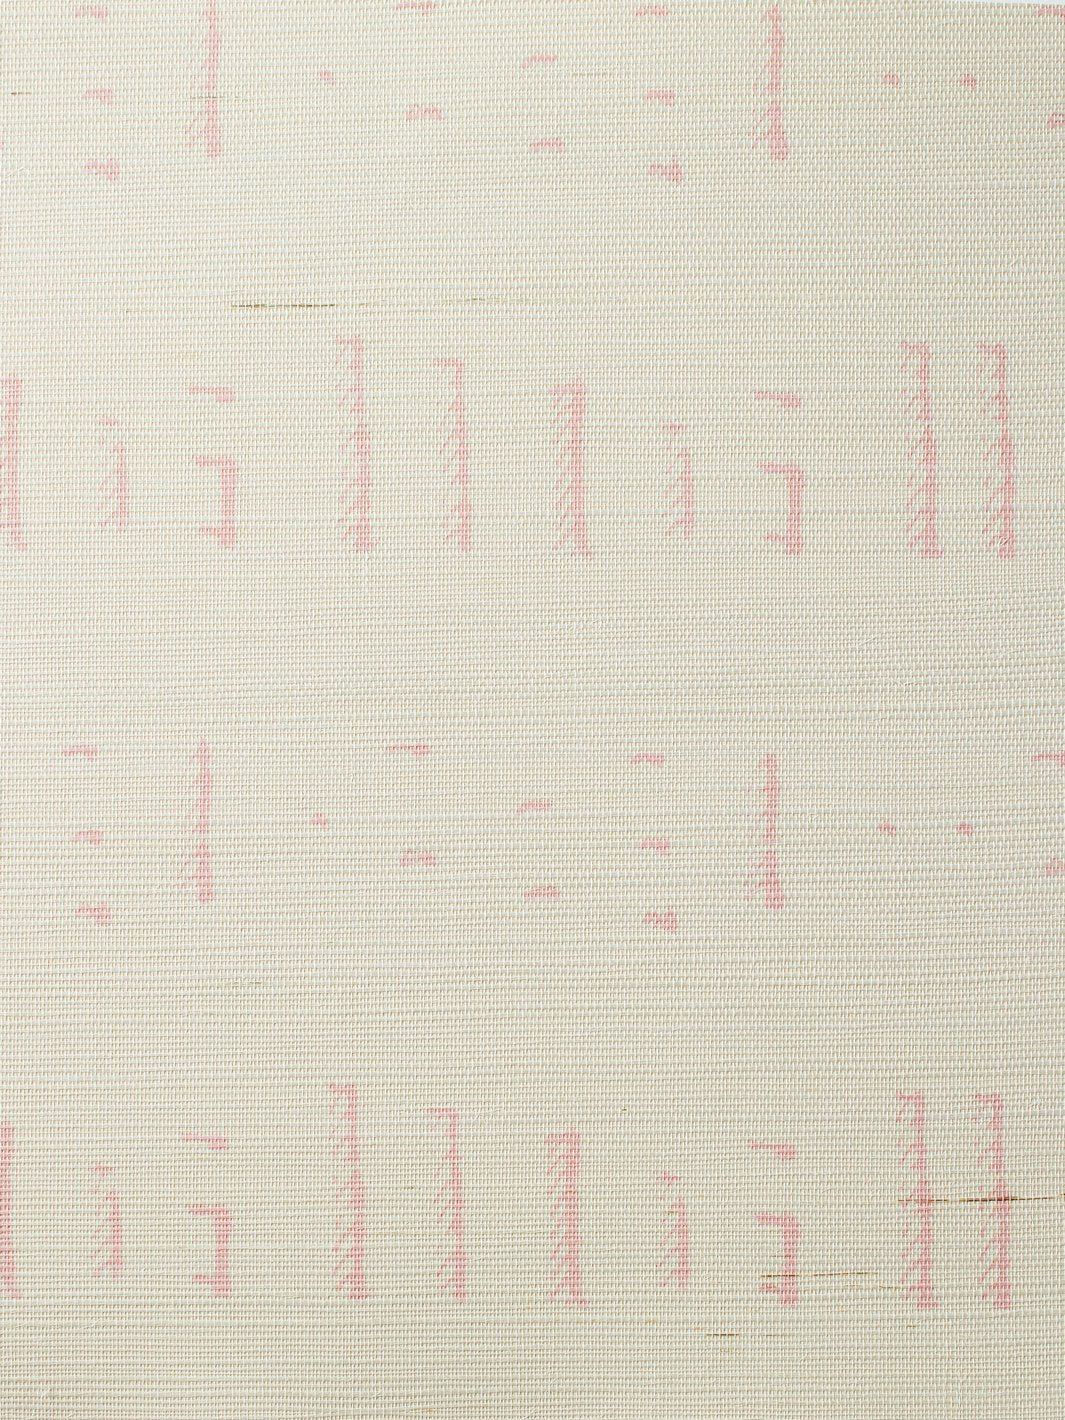 'Stitch' Grasscloth' Wallpaper by Nathan Turner - Pink